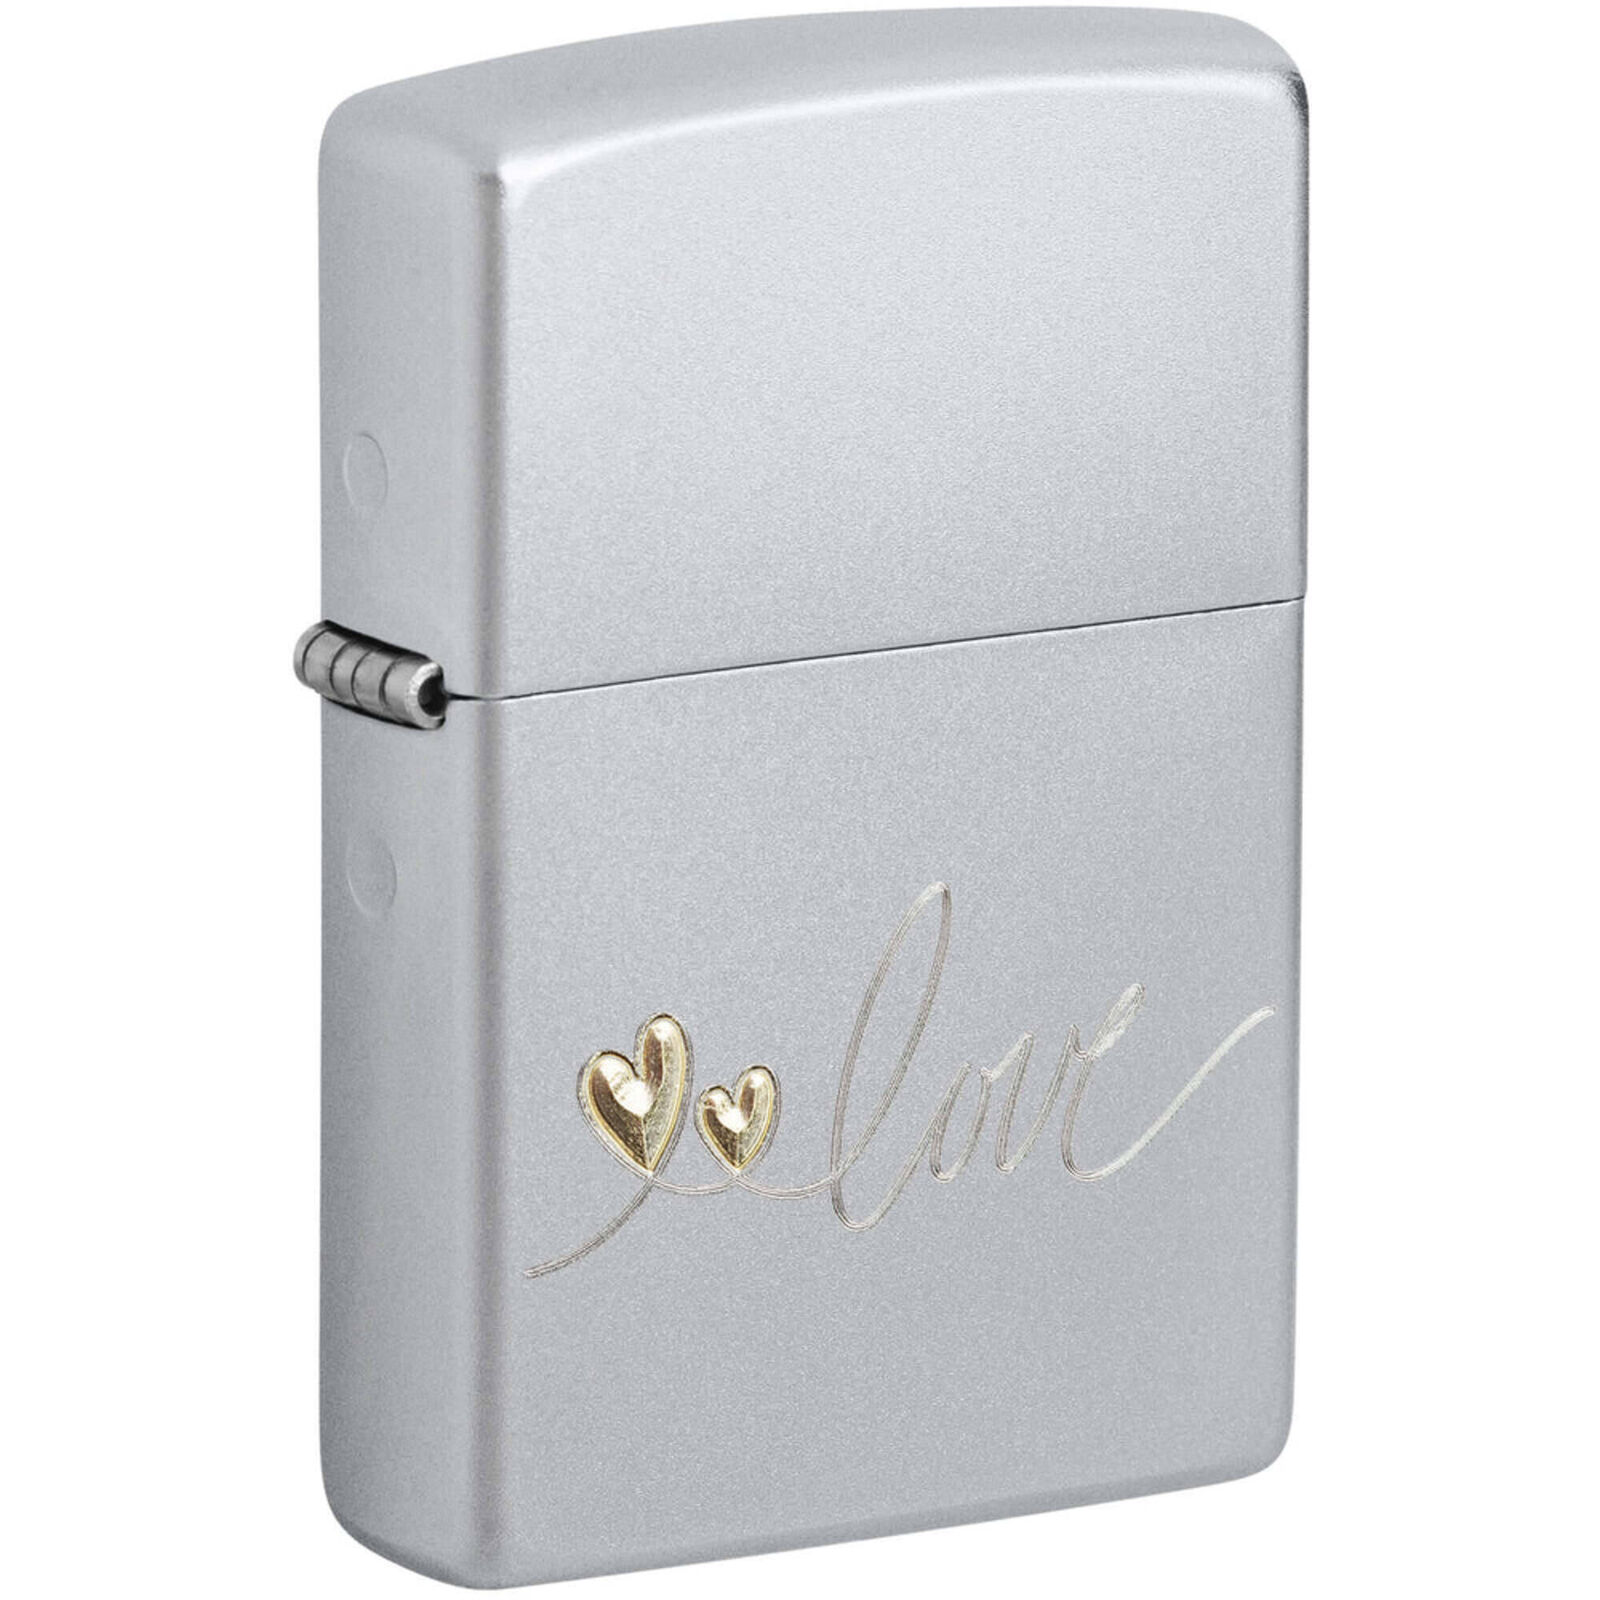 Zippo Windproof Lighter Love Design with Pair of Hearts Satin Chrome Metal 48725